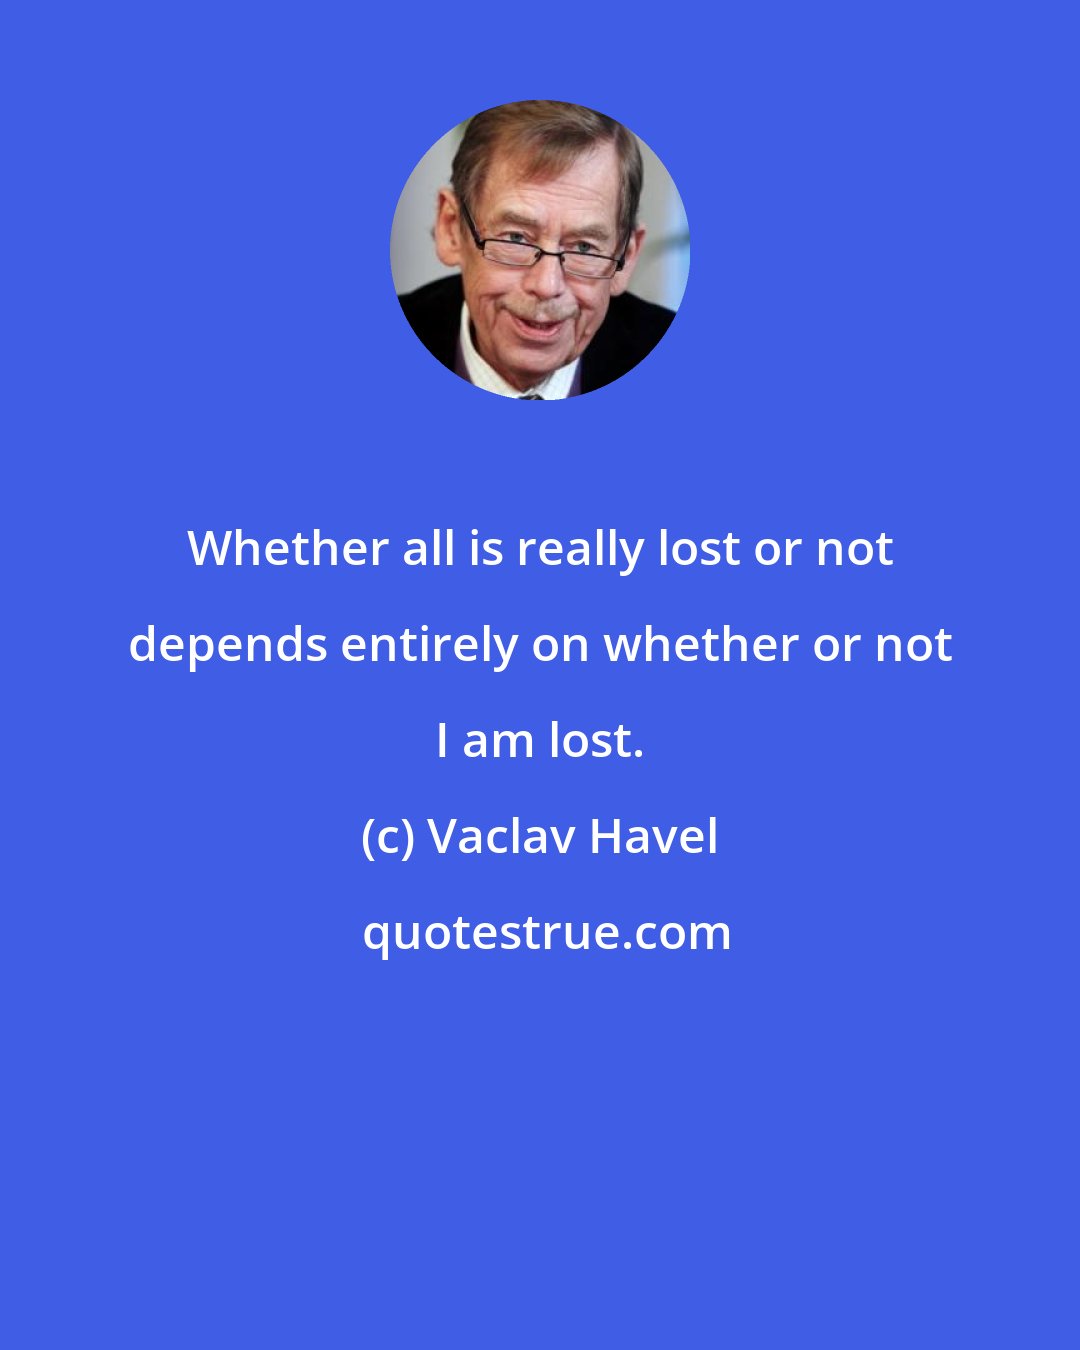 Vaclav Havel: Whether all is really lost or not depends entirely on whether or not I am lost.